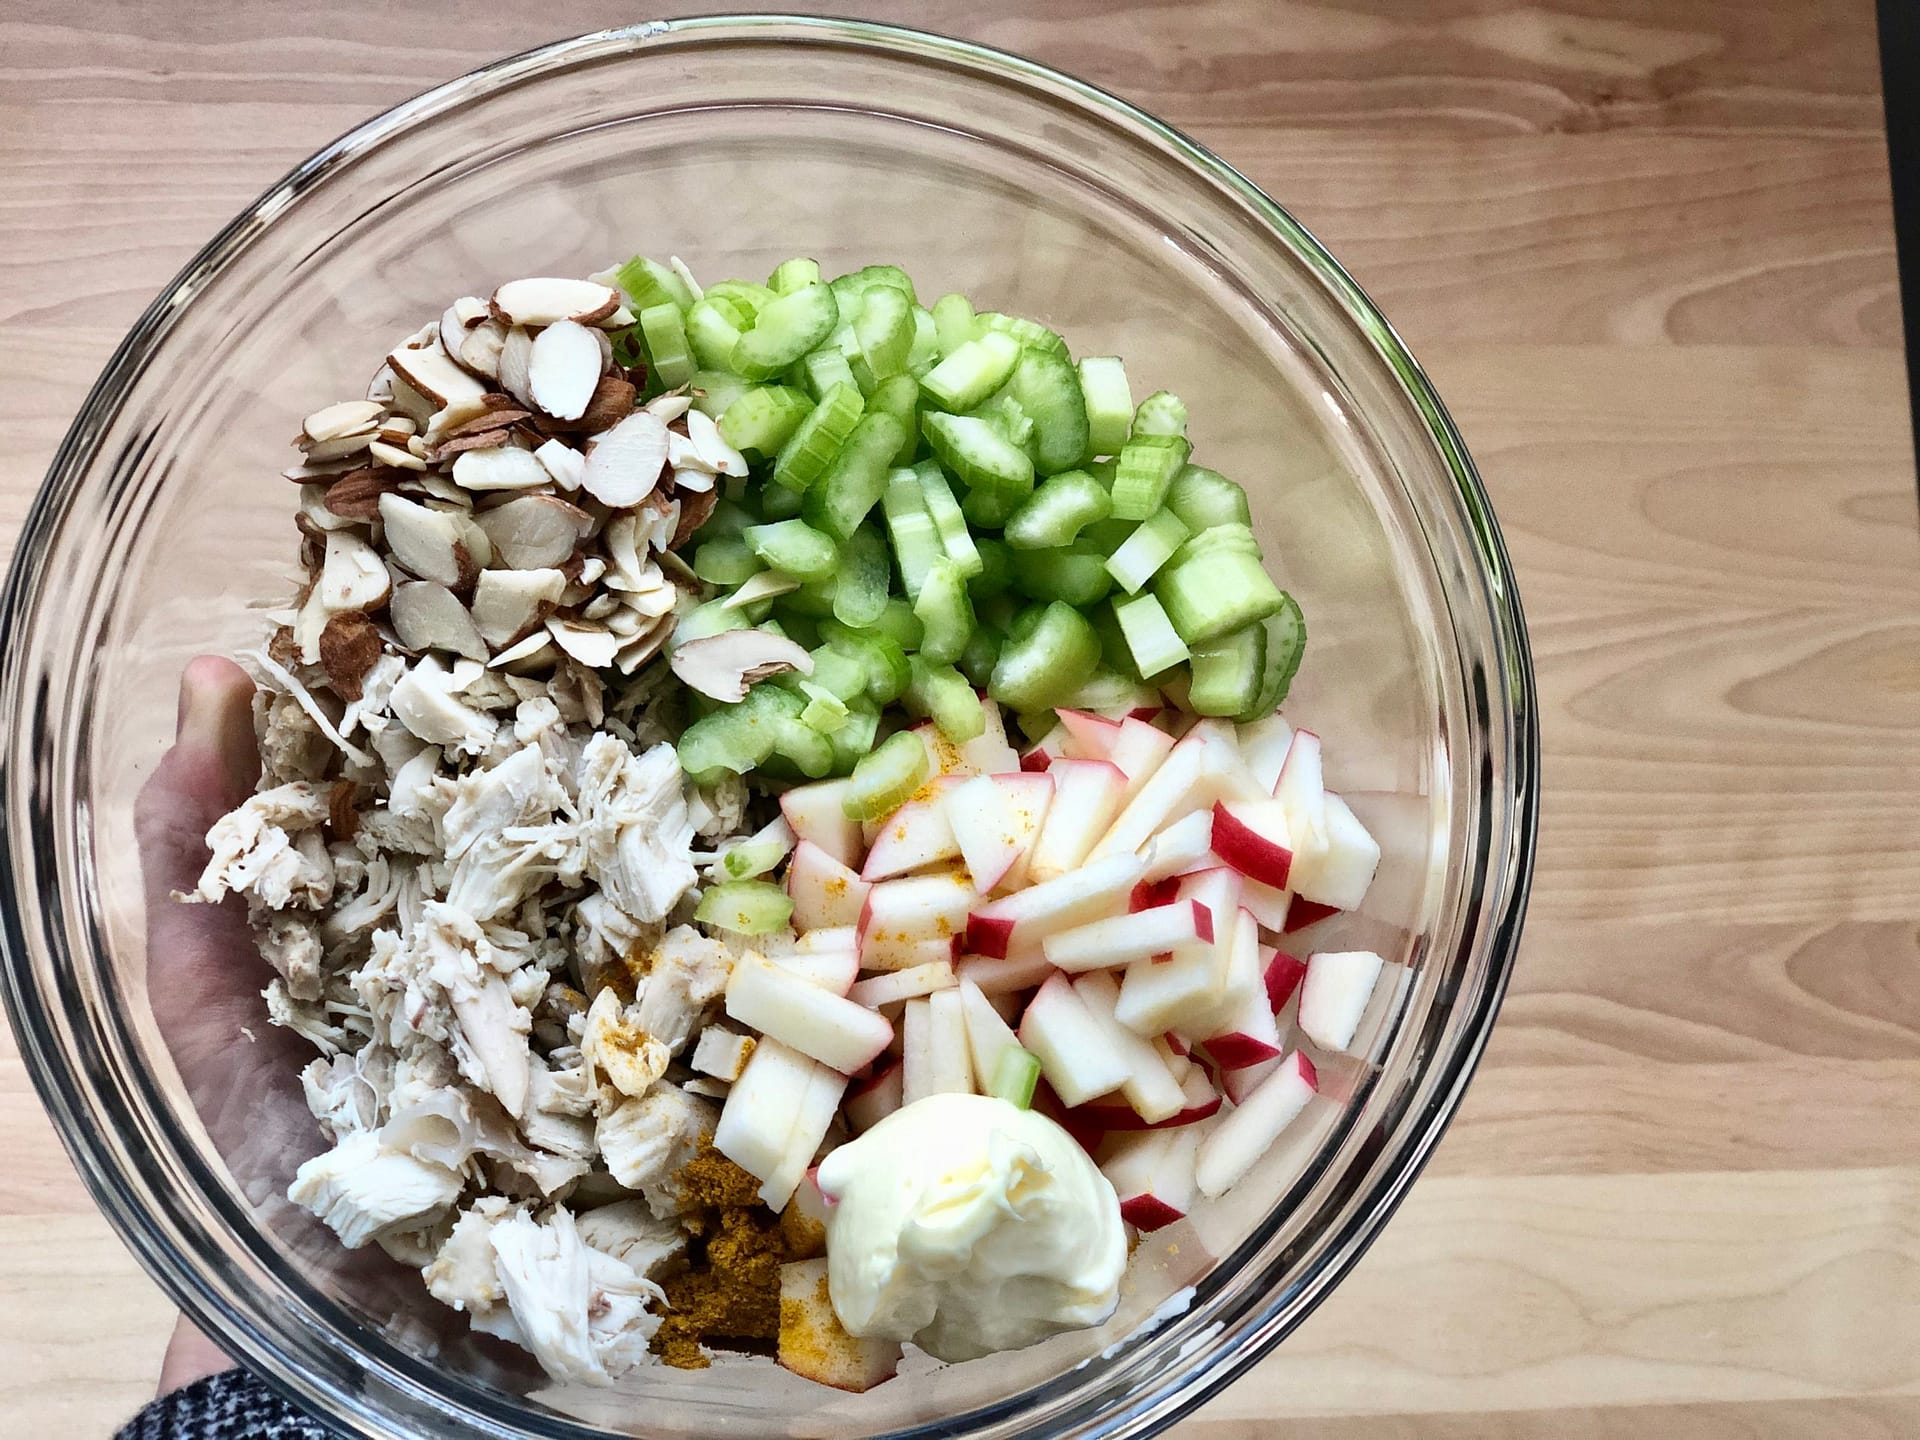 Glass bowl with ingredients for healthy curry chicken salad. Chopped apple, chopped celery, sliced almonds, cooked and chopped chicken, curry powder, and avocado oil mayonnaise.